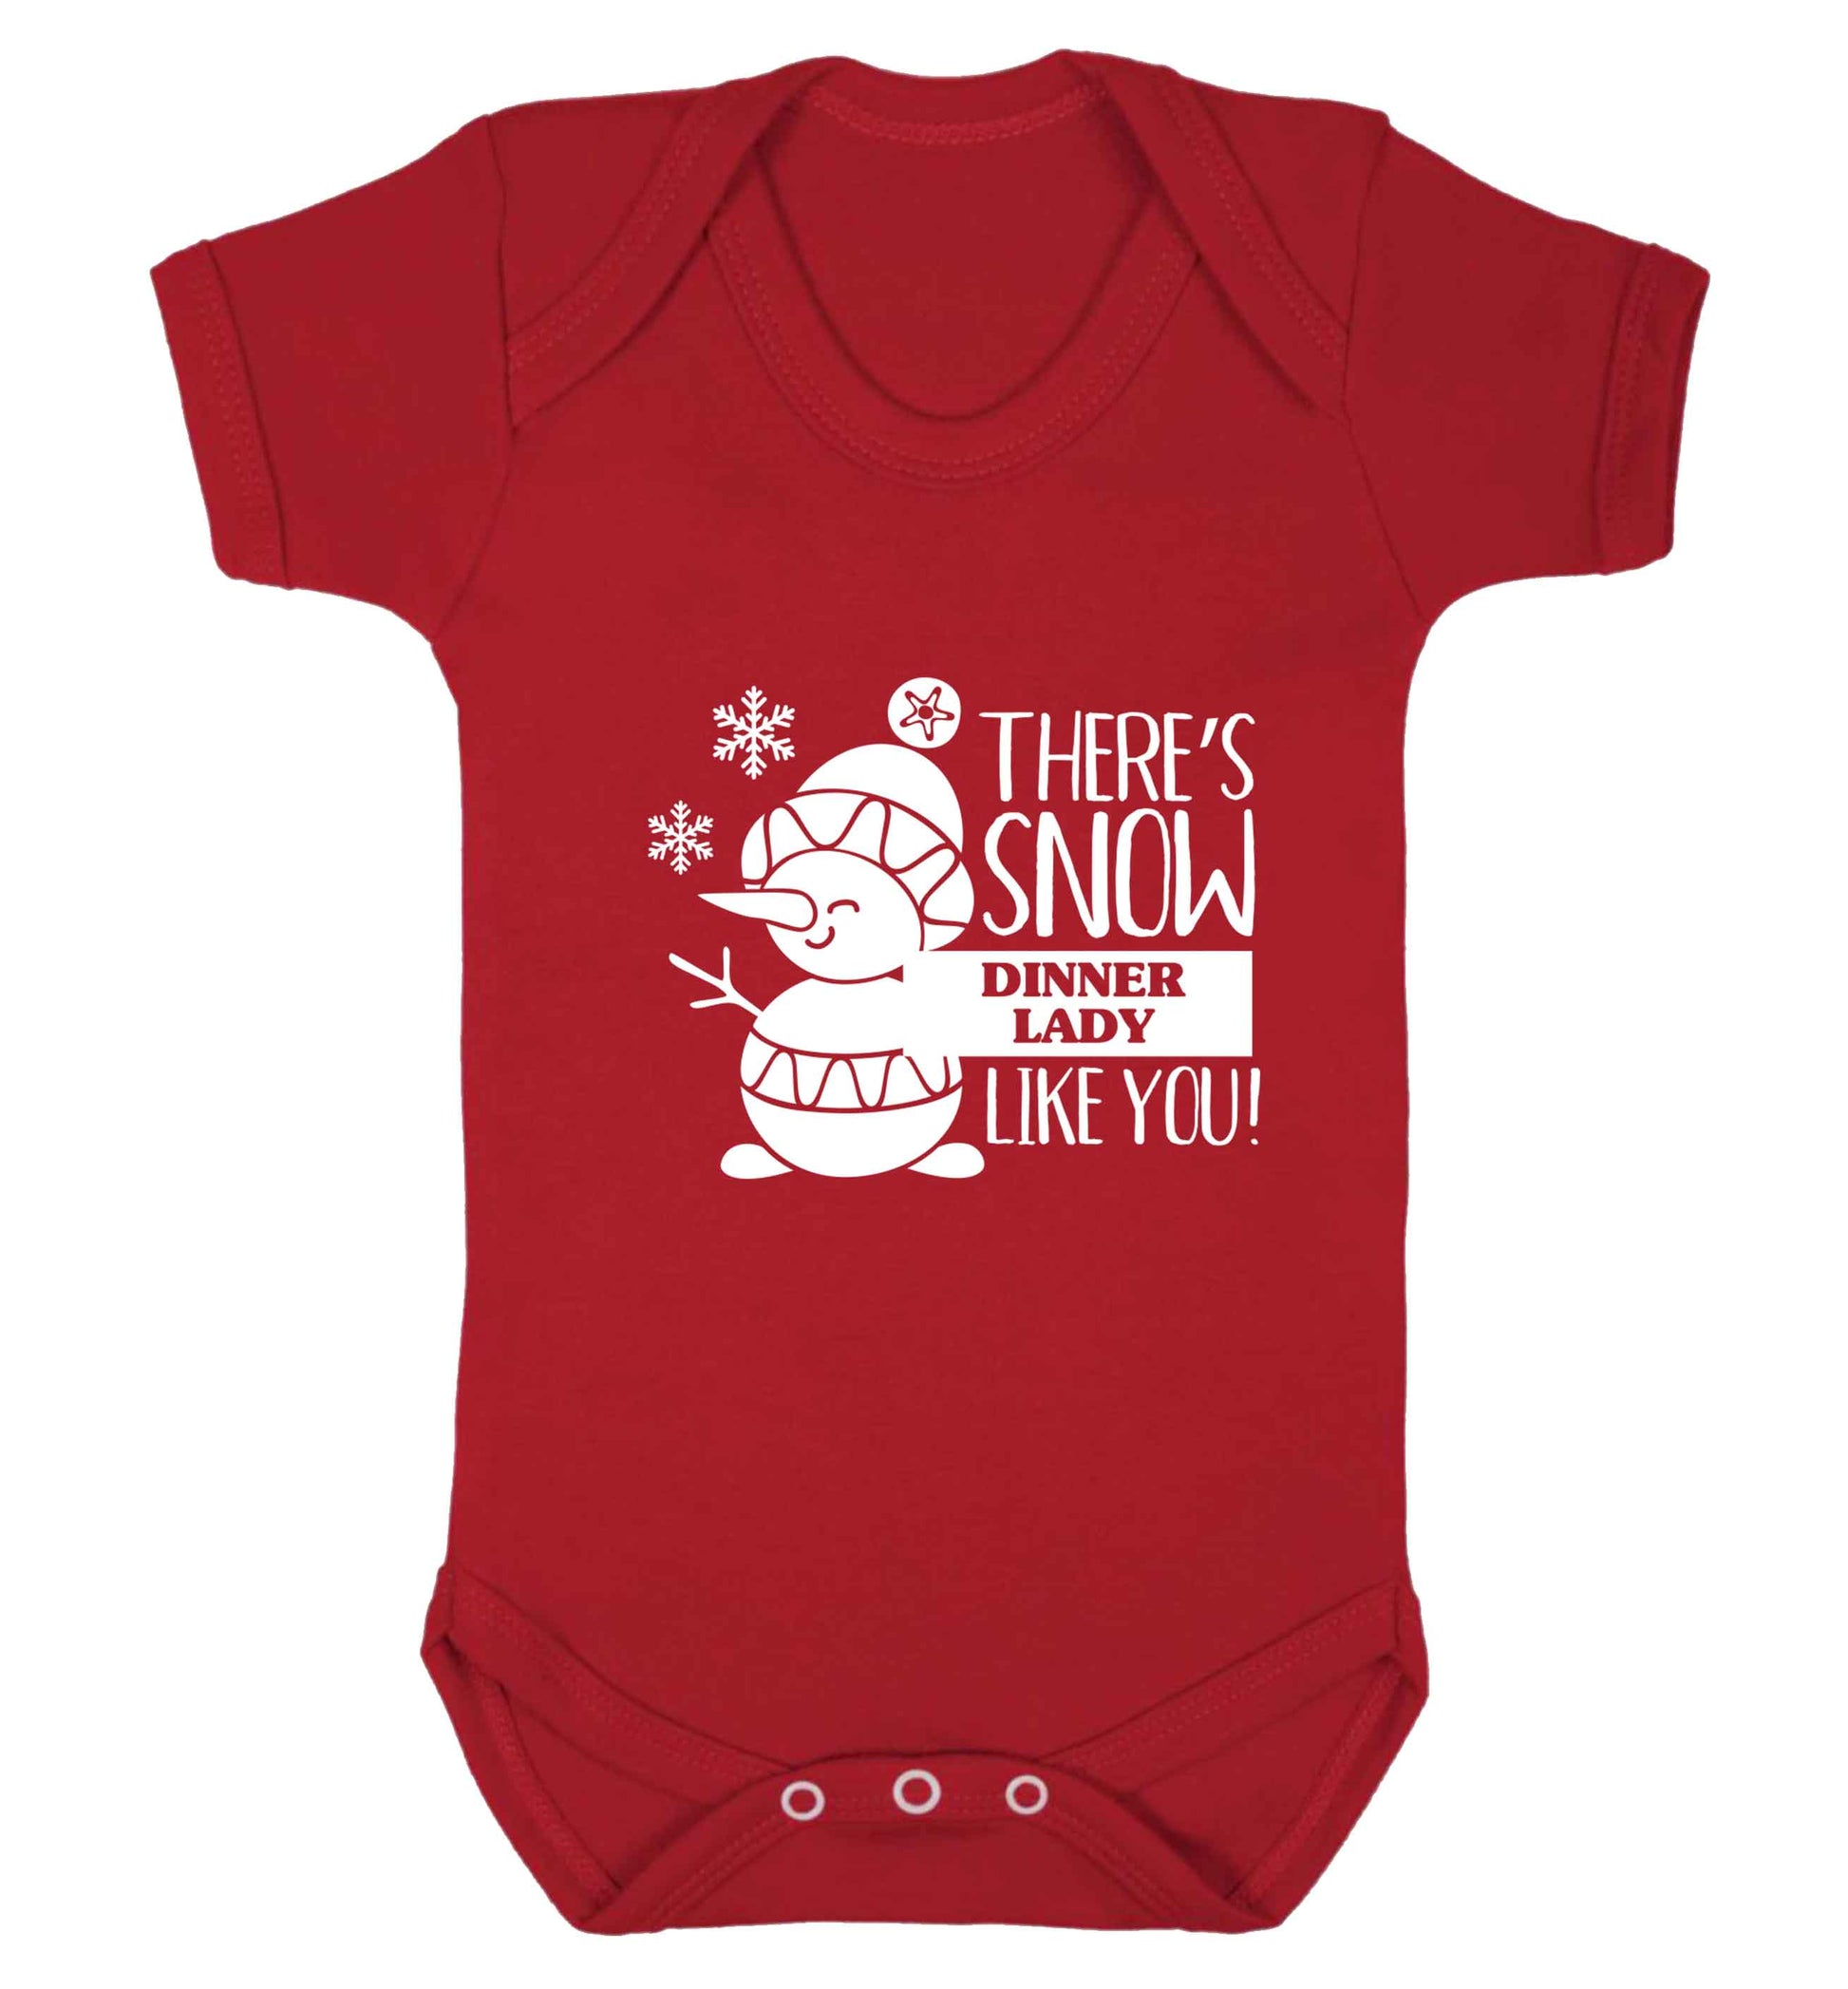 There's snow dinner lady like you baby vest red 18-24 months